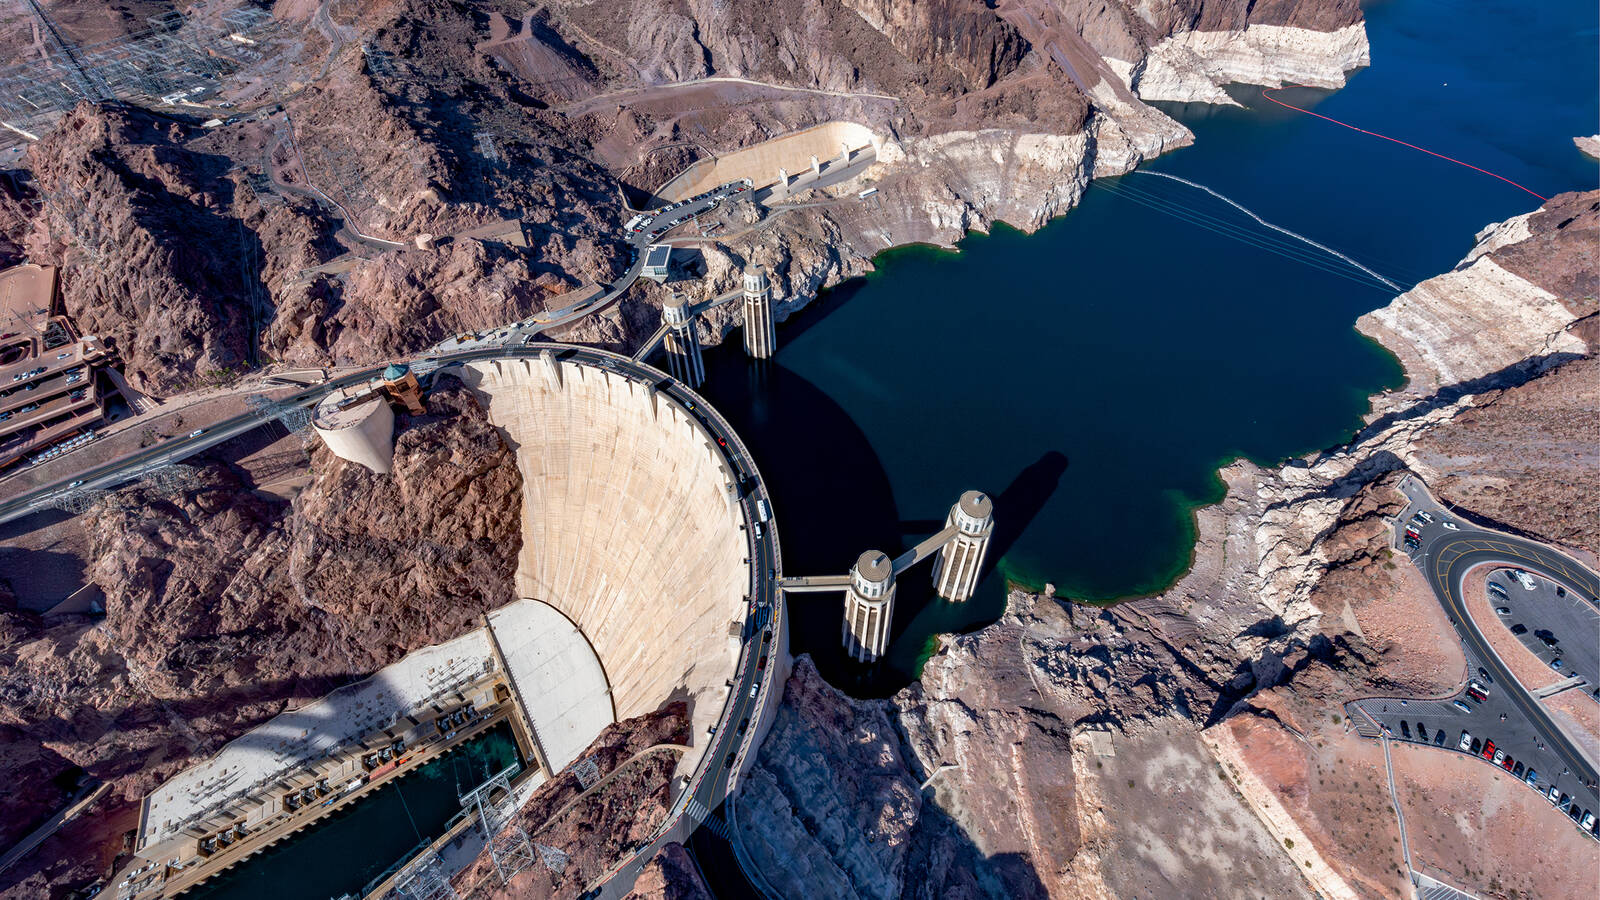 <p>The 726-foot-high Hoover Dam was completed in 1936. At the time, it was the world’s largest dam. Today, the white bathtub ring on America’s largest reservoir shows how far the water level has dropped.</p>